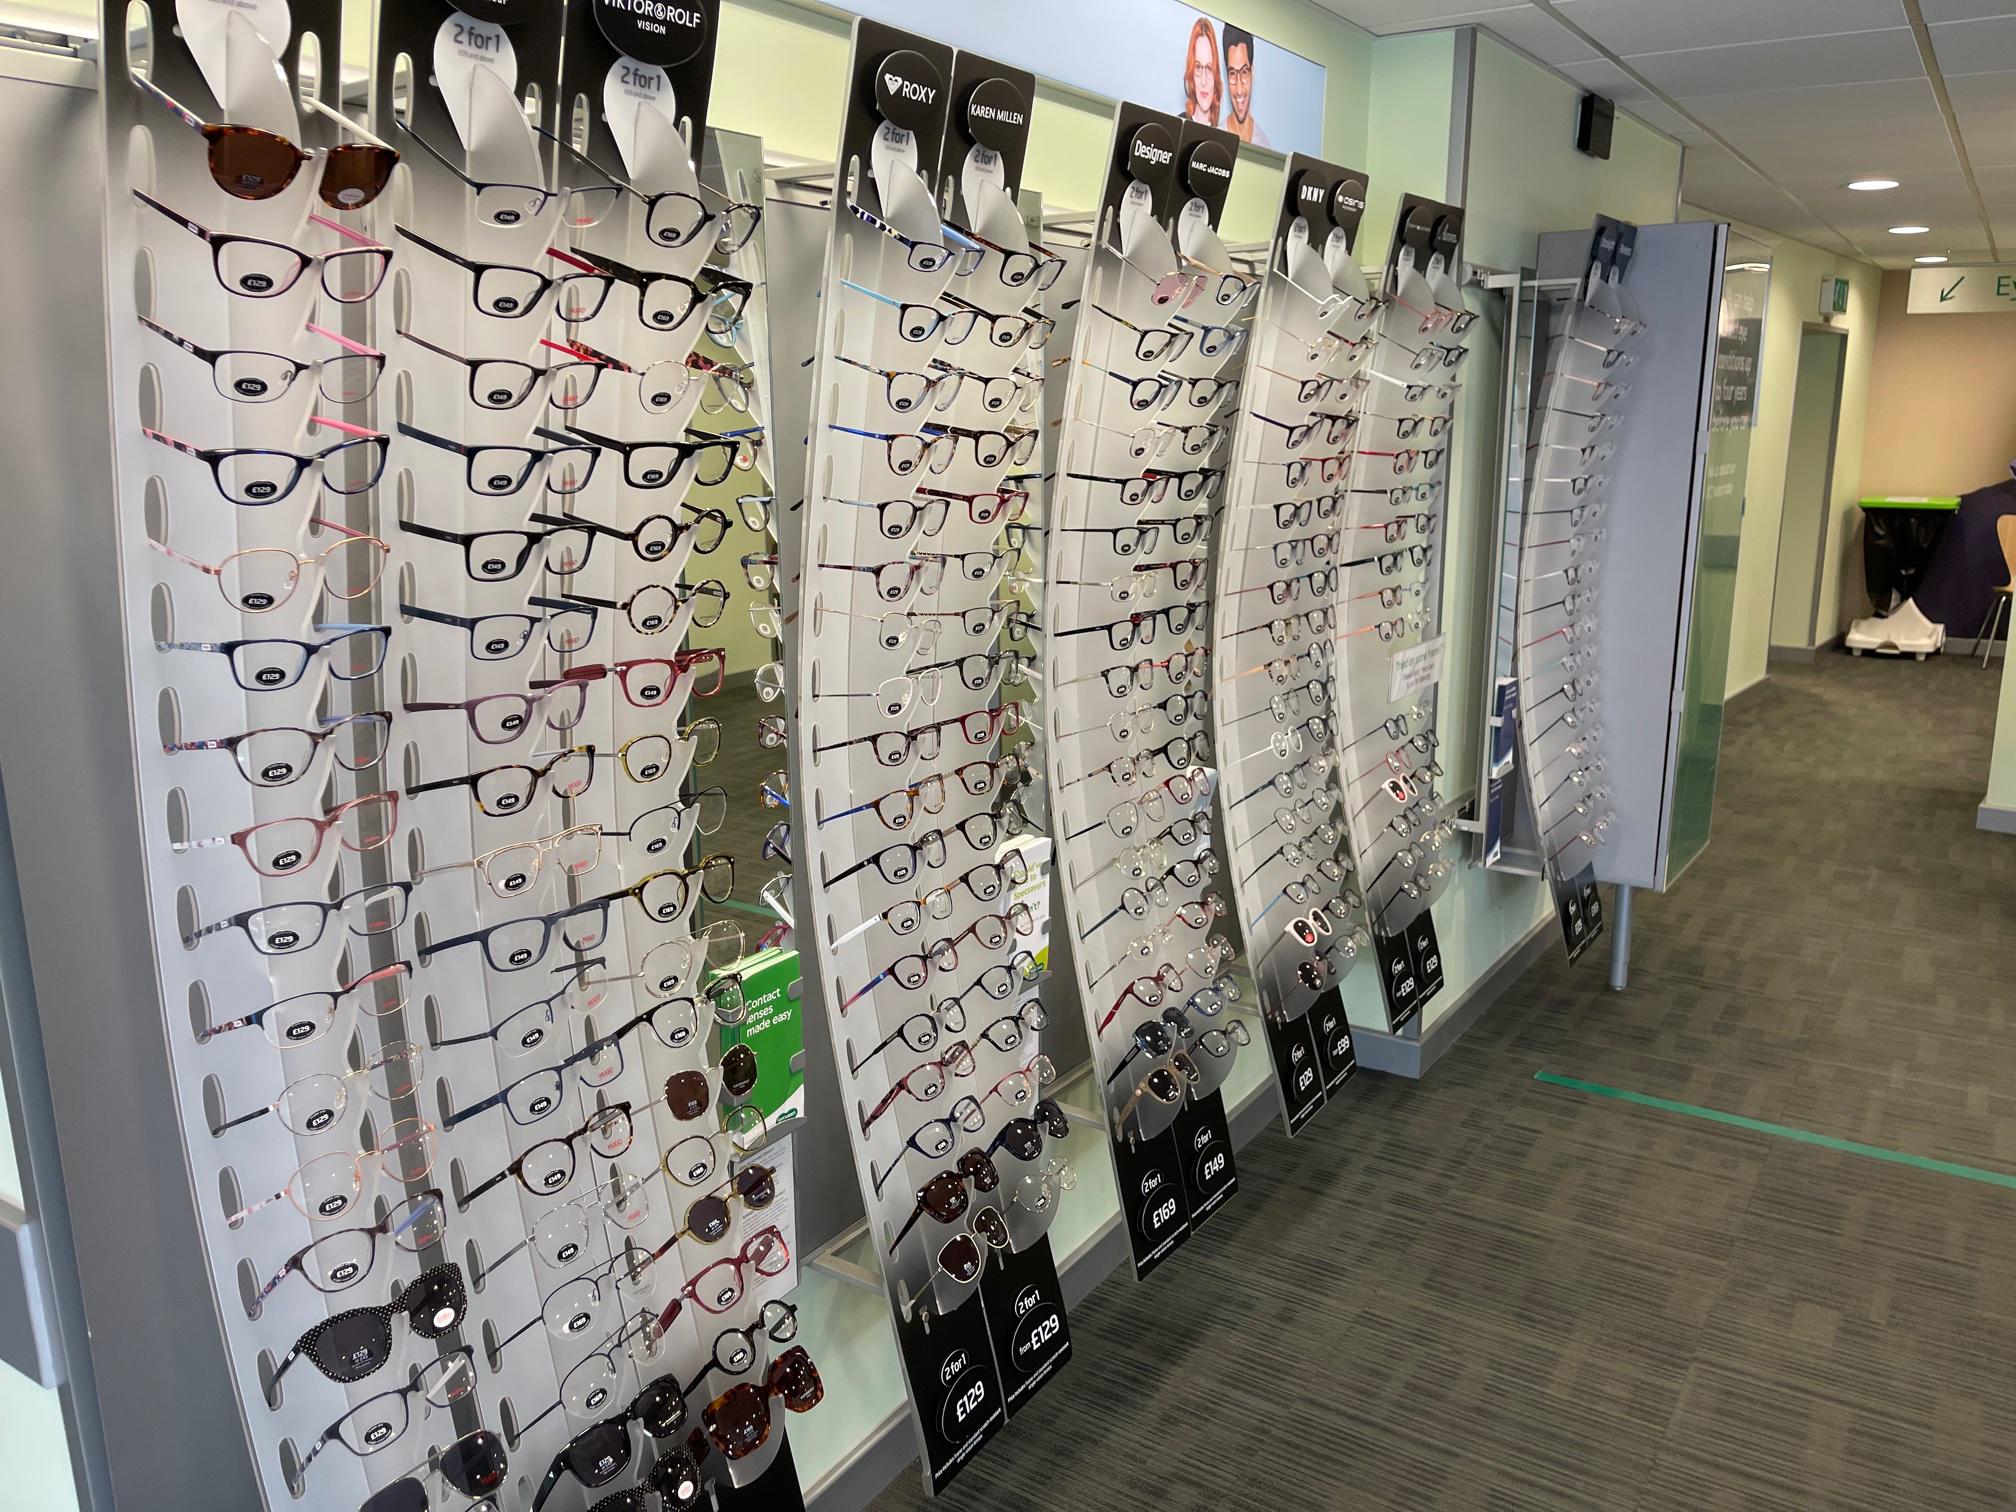 Images Specsavers Opticians and Audiologists - Bicester